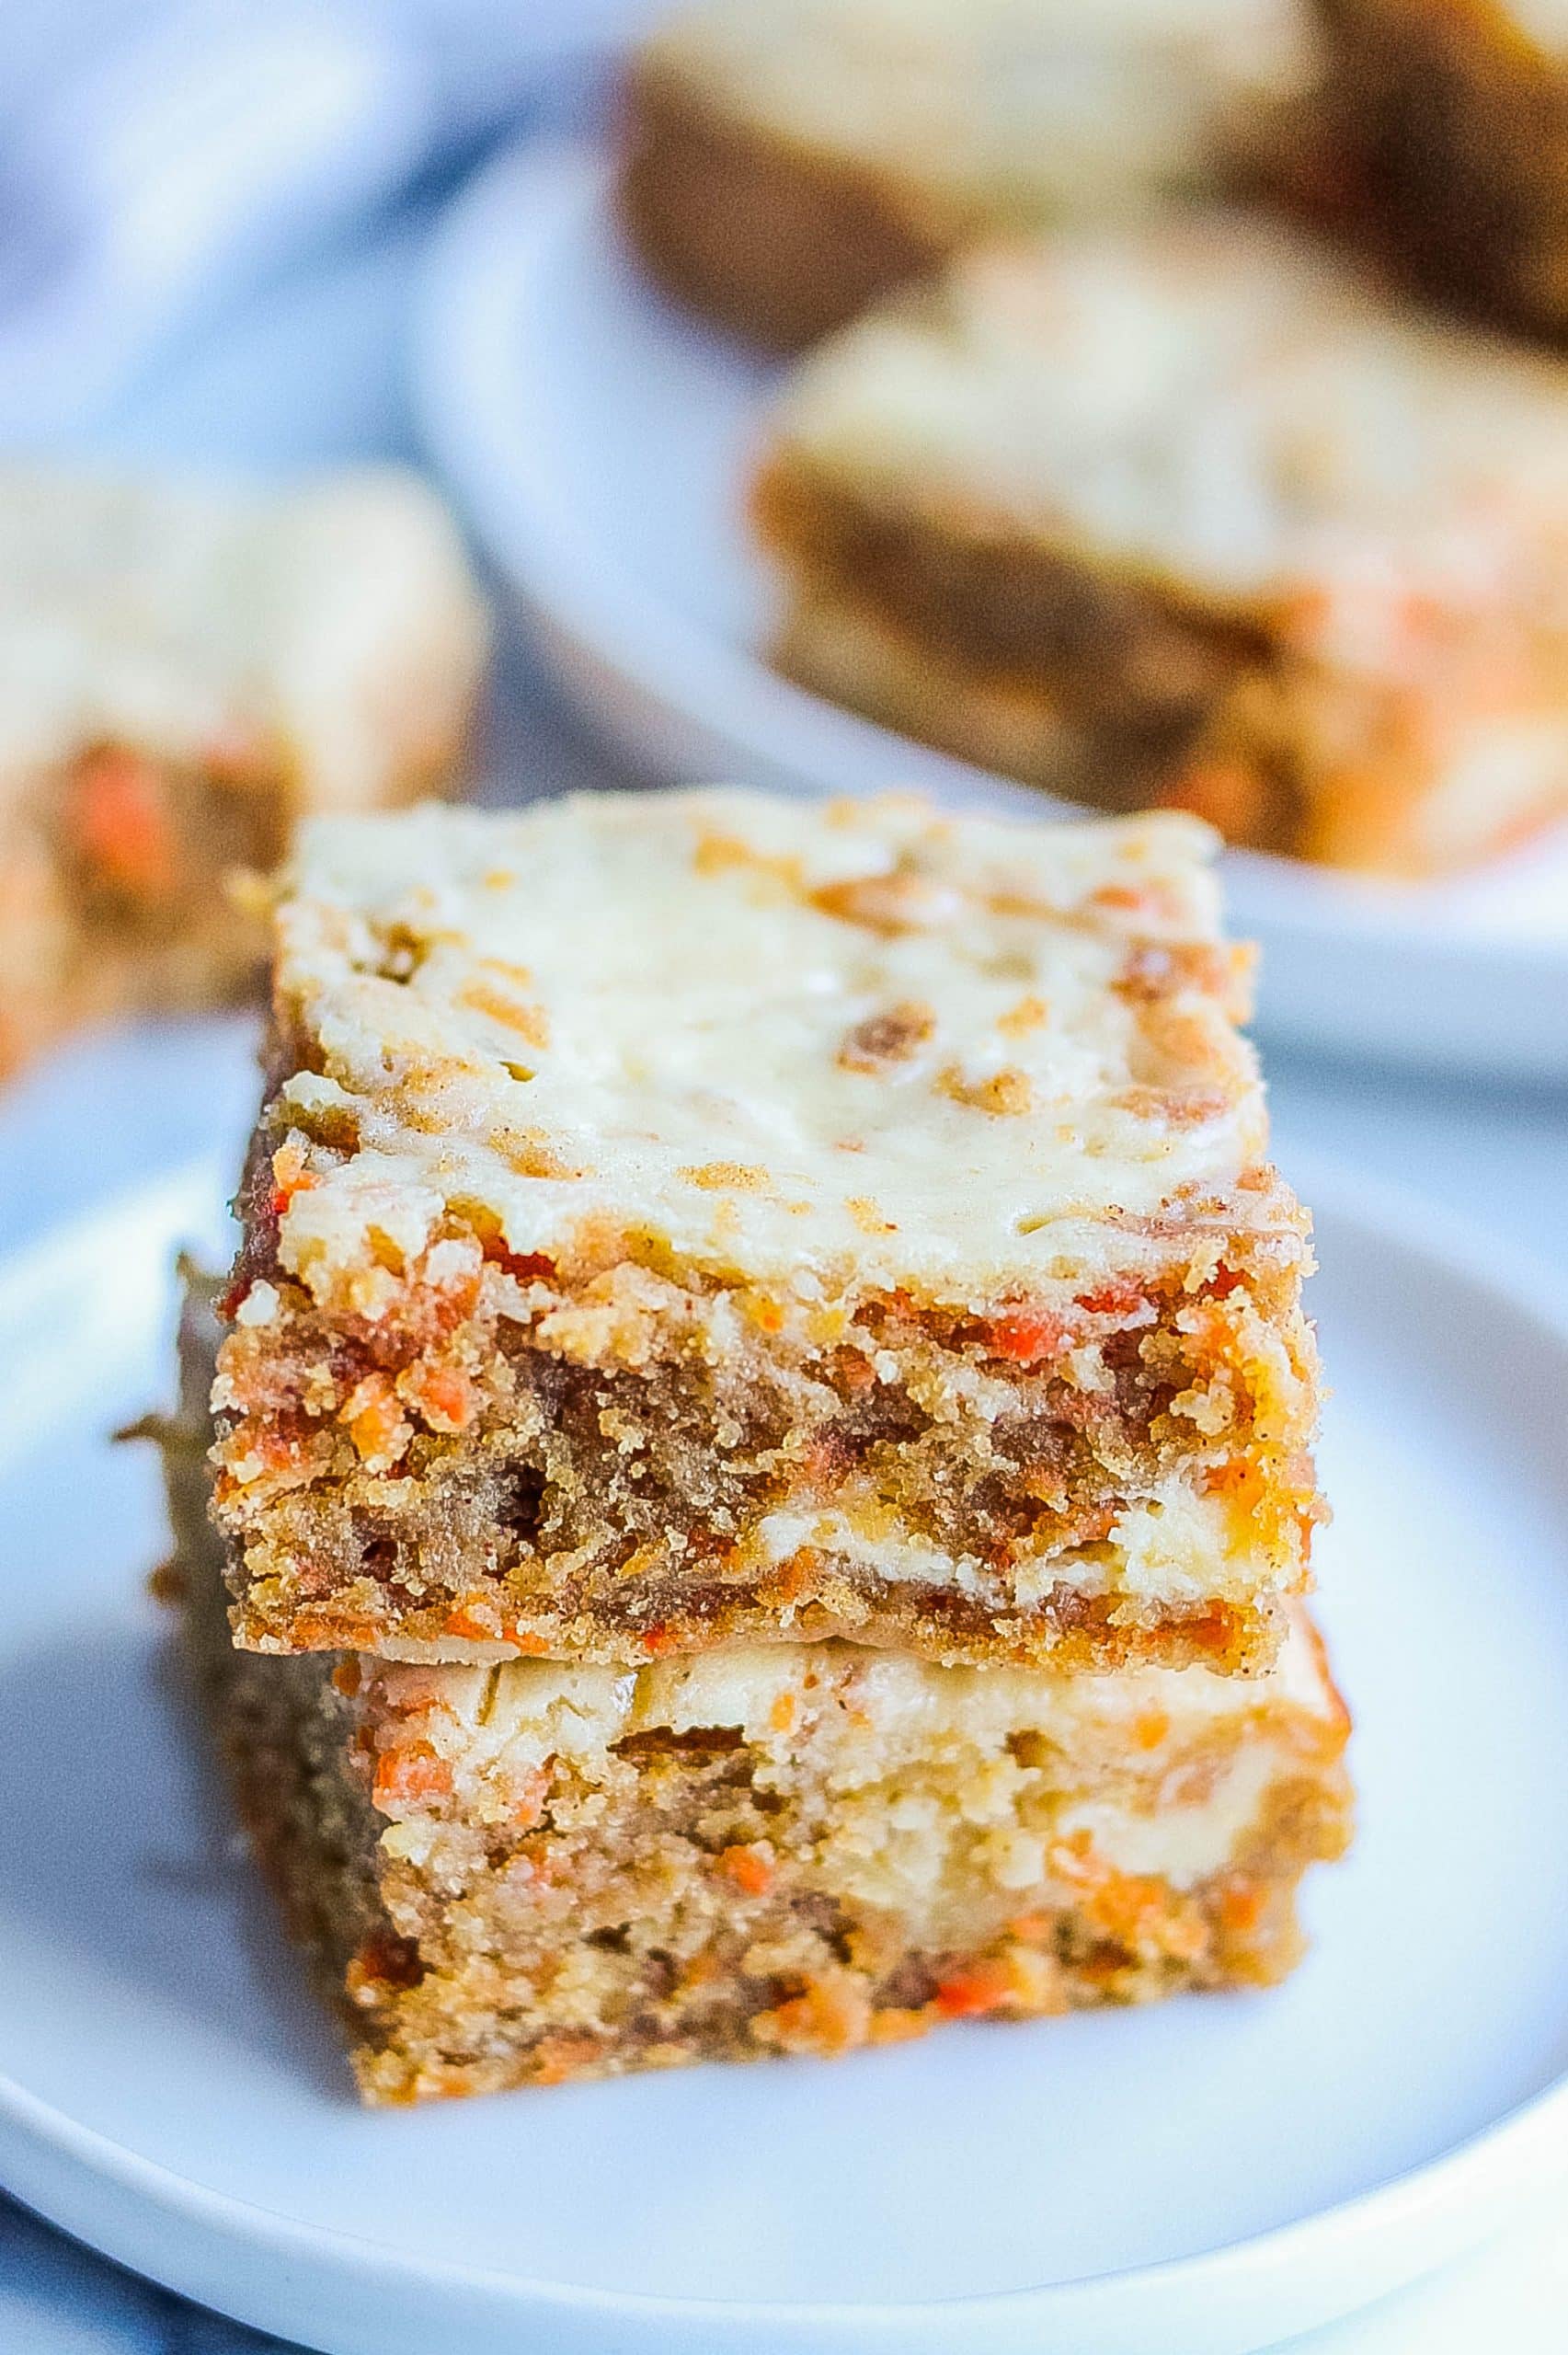 Carrot Cake with Cheesecake Filling